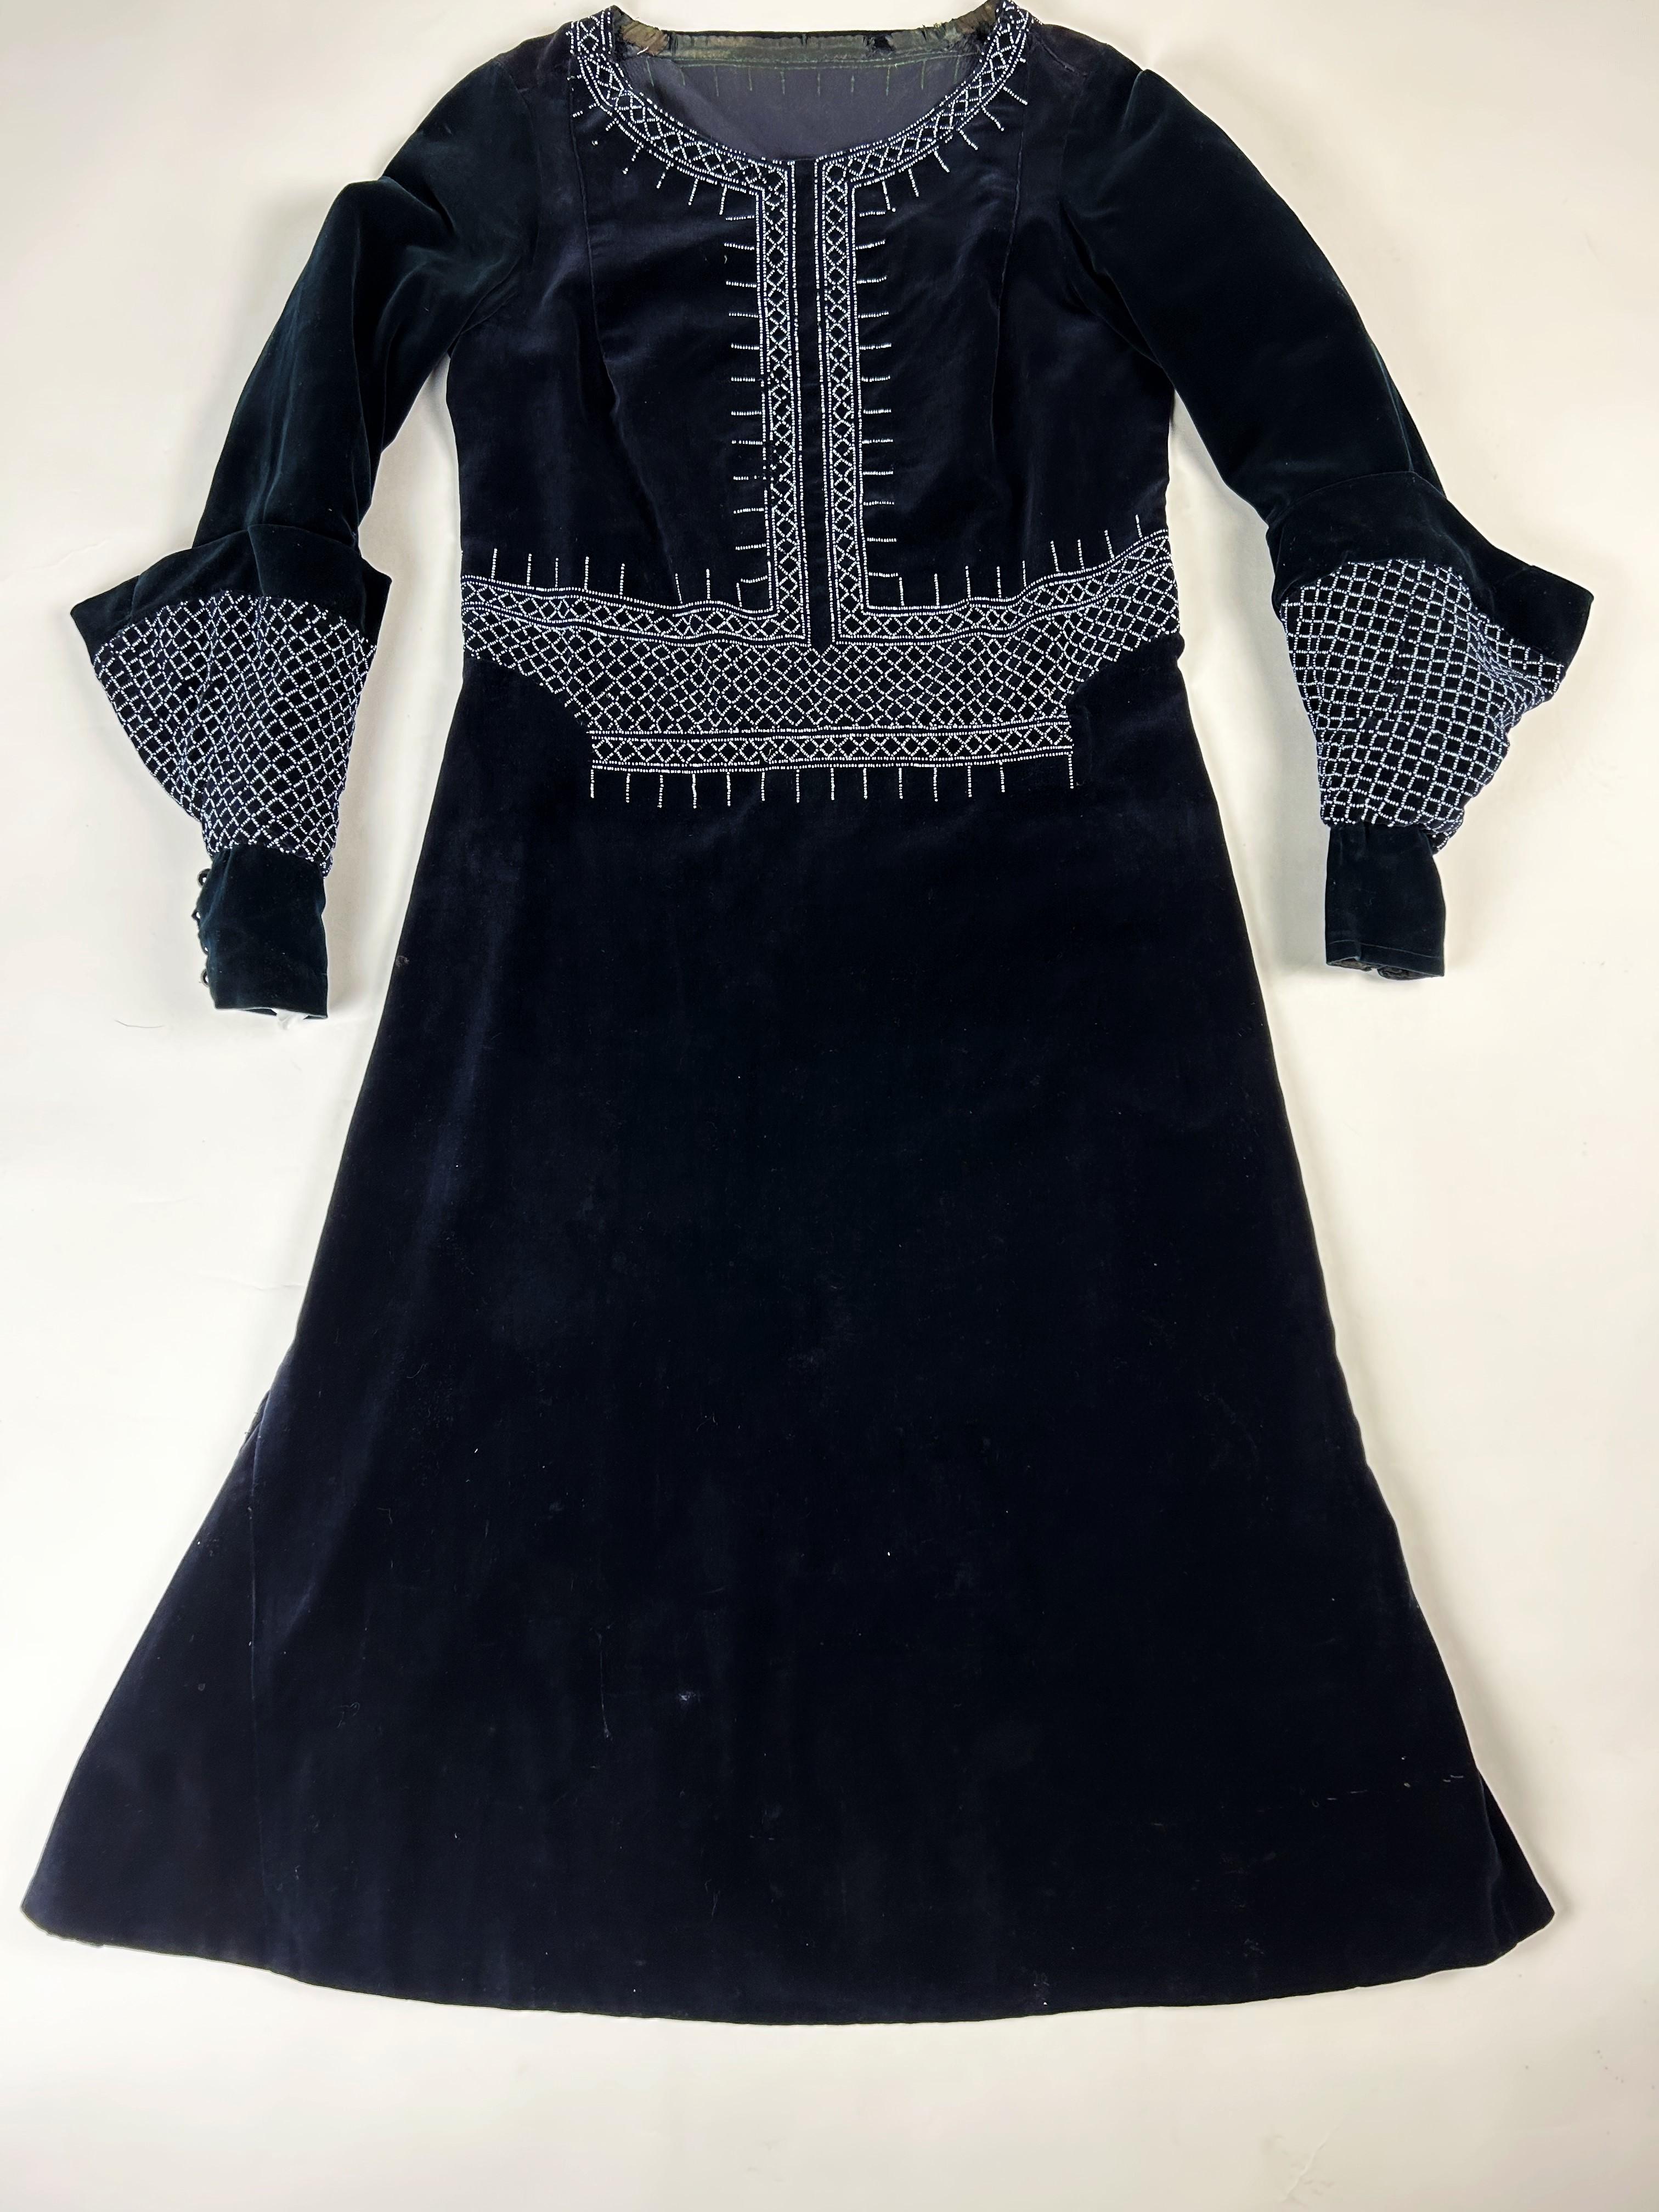 A Navy Velvet Sac Dress with glass beads embroideries - France Circa 1925-1930 In Good Condition For Sale In Toulon, FR